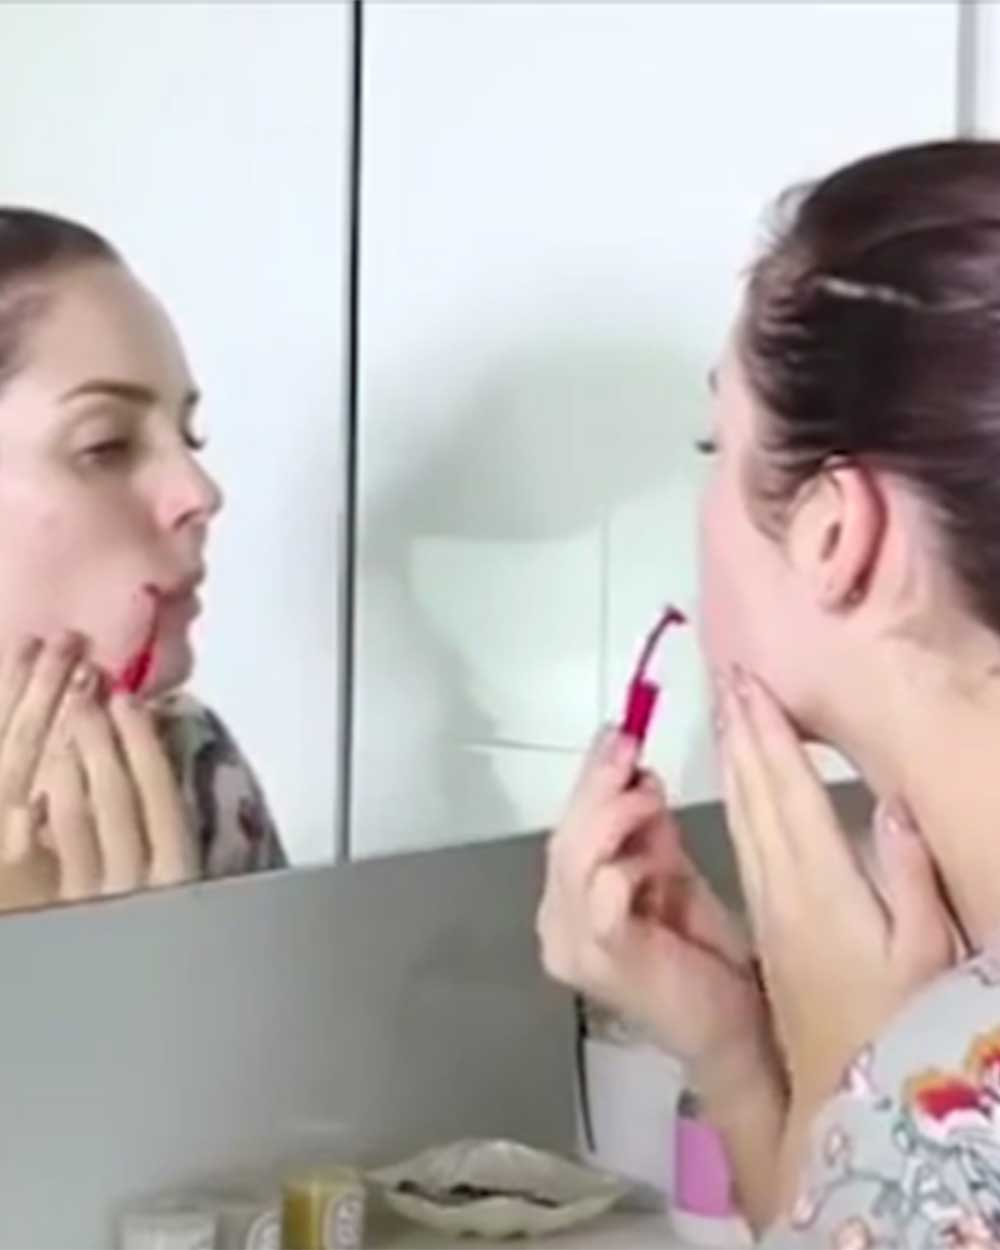 Face shaving is totally a thing